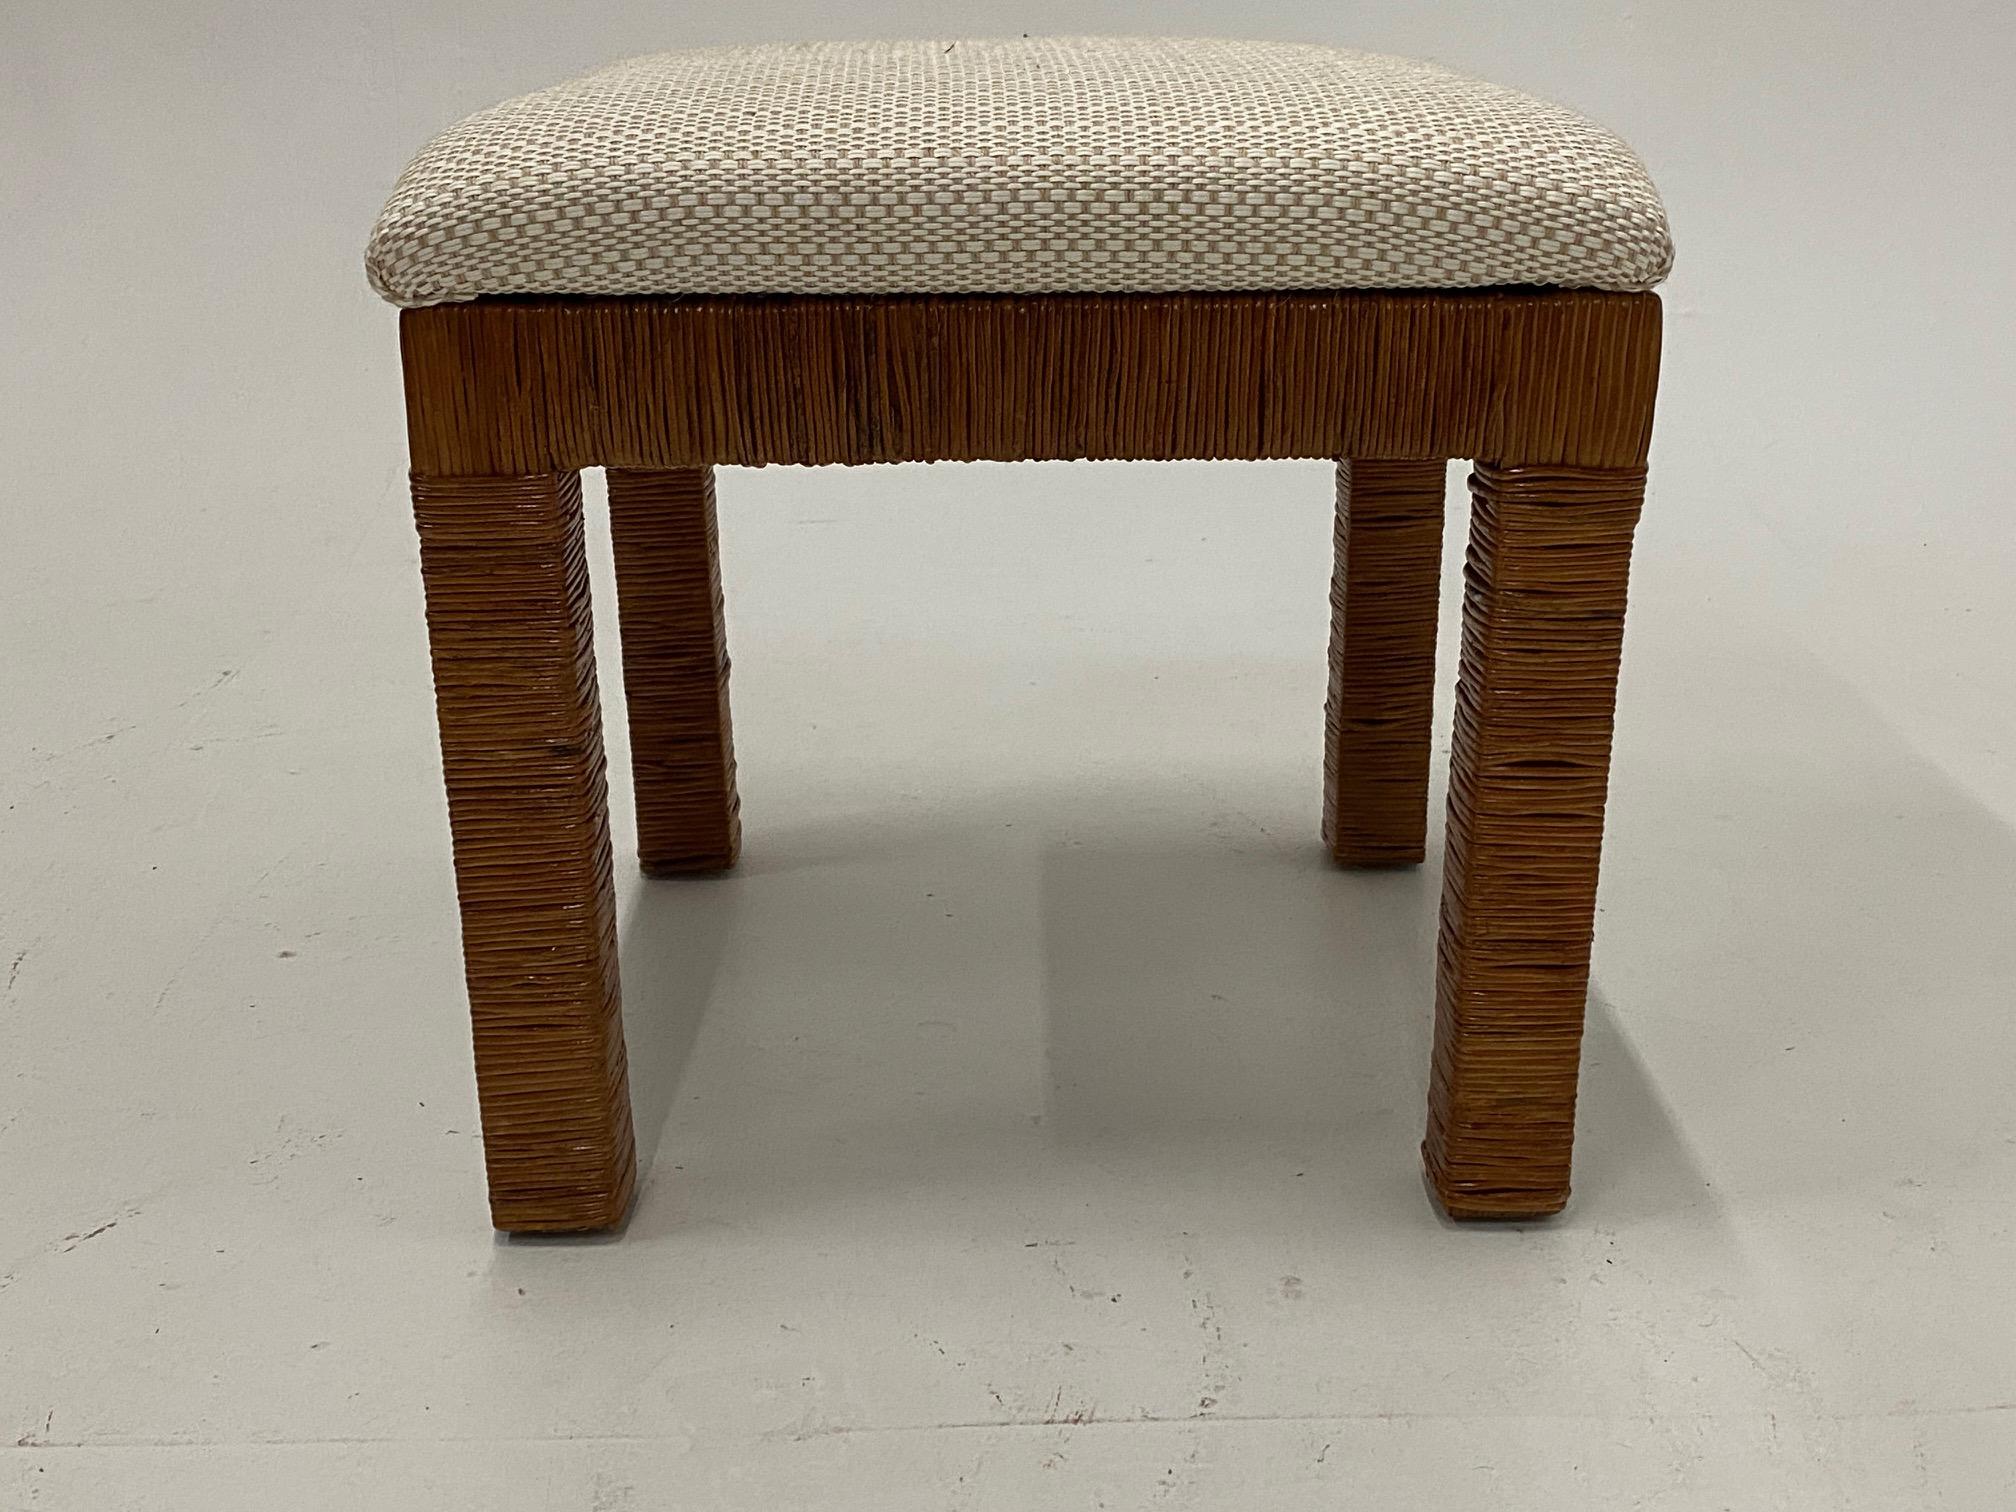 Upholstery Stylish Pair of Newly Upholstered Woven Wicker Benches For Sale